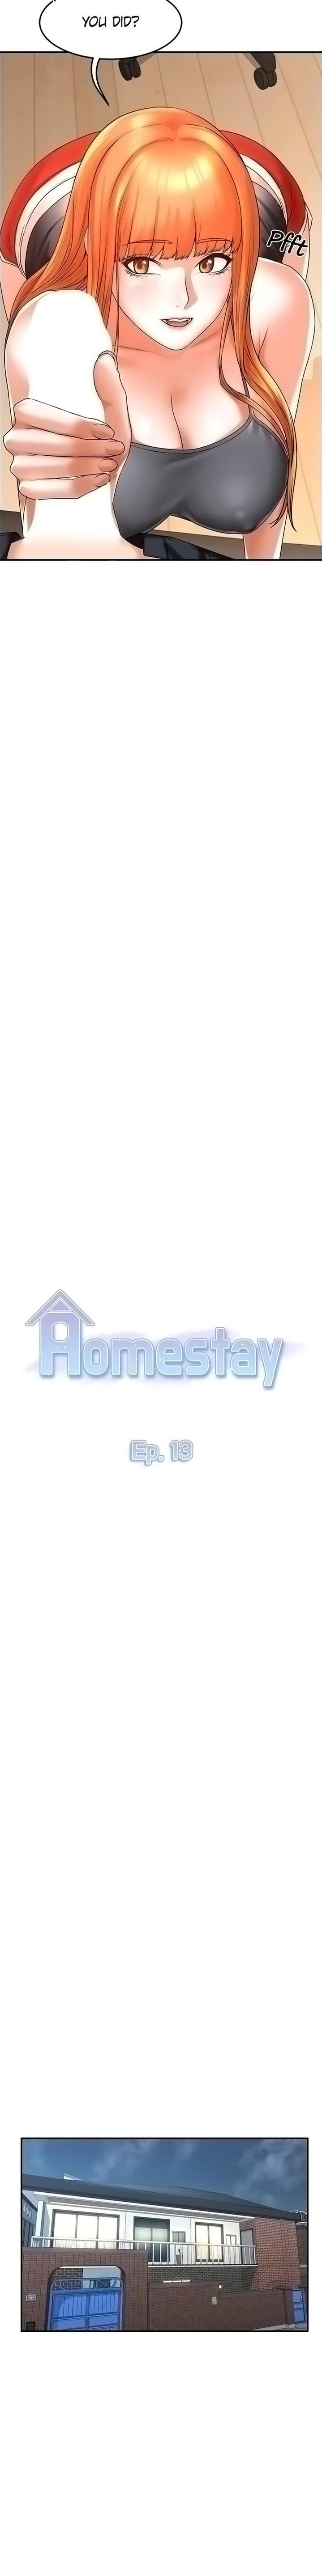 Homestay - Chapter 13 Page 2